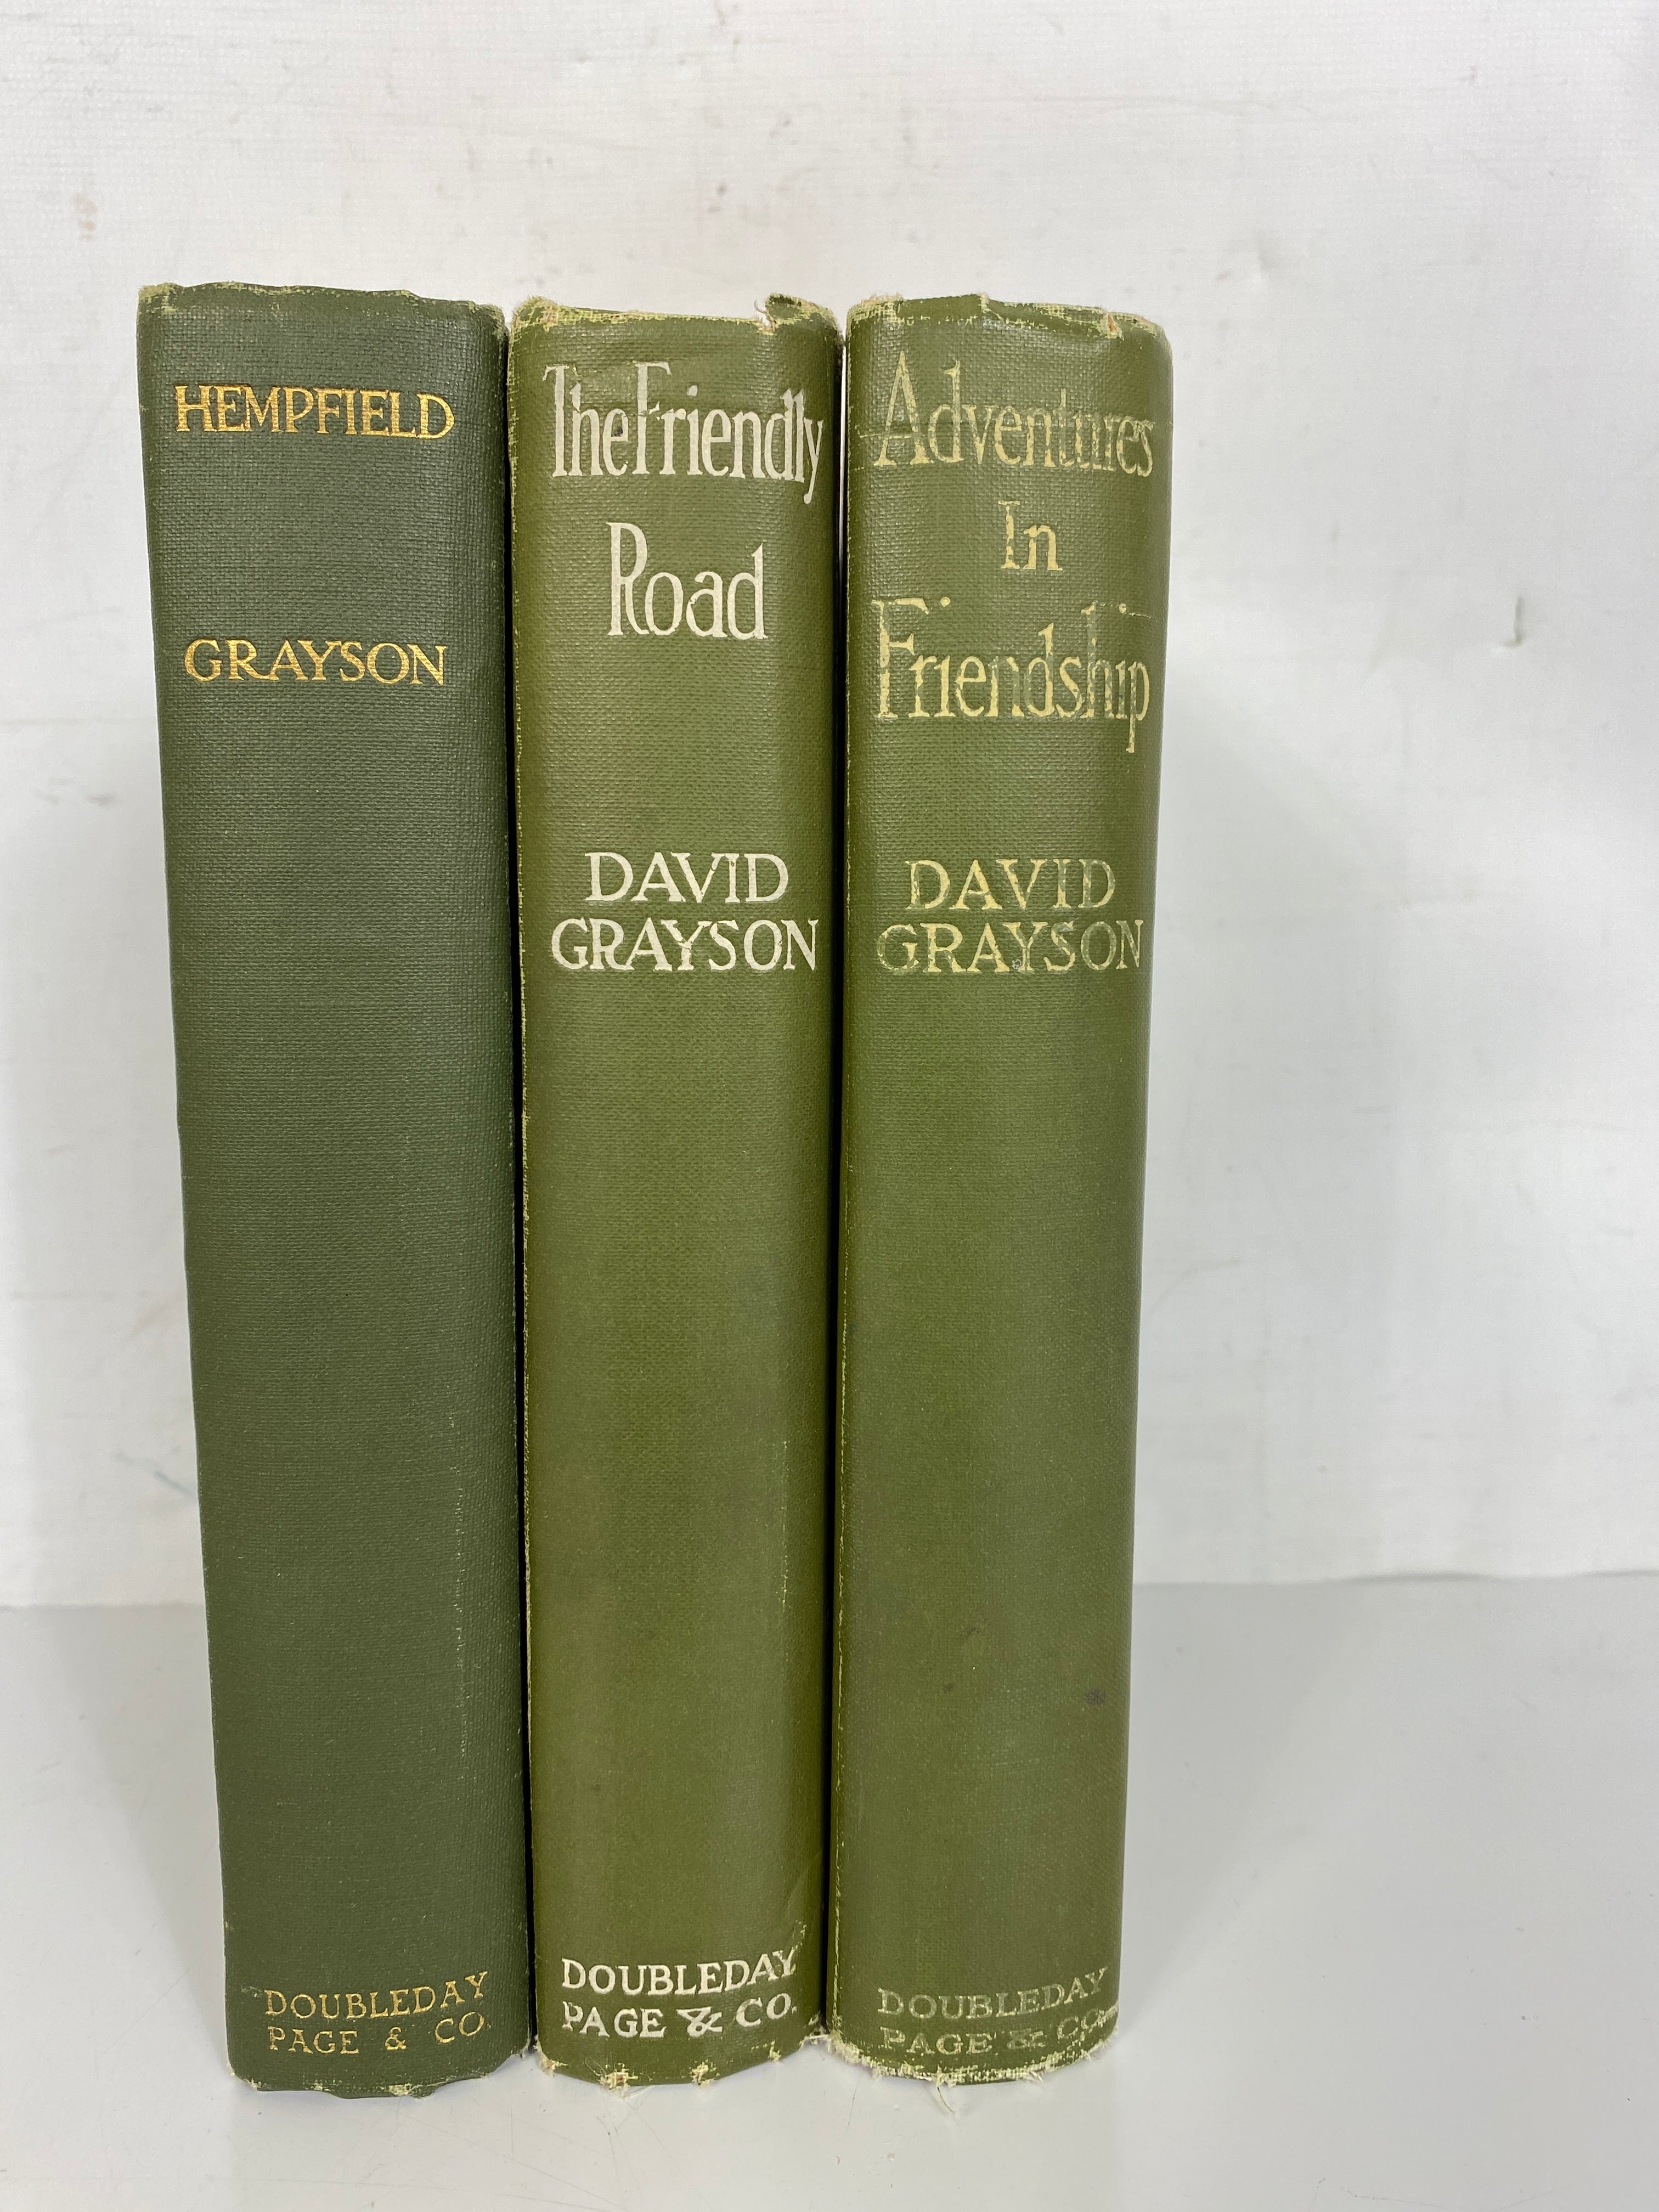 Lot of 3 David Grayson Novels: Adventures in Friendship (1910), The Friendly Road (1913), and Hempfield (1915) Antique HC